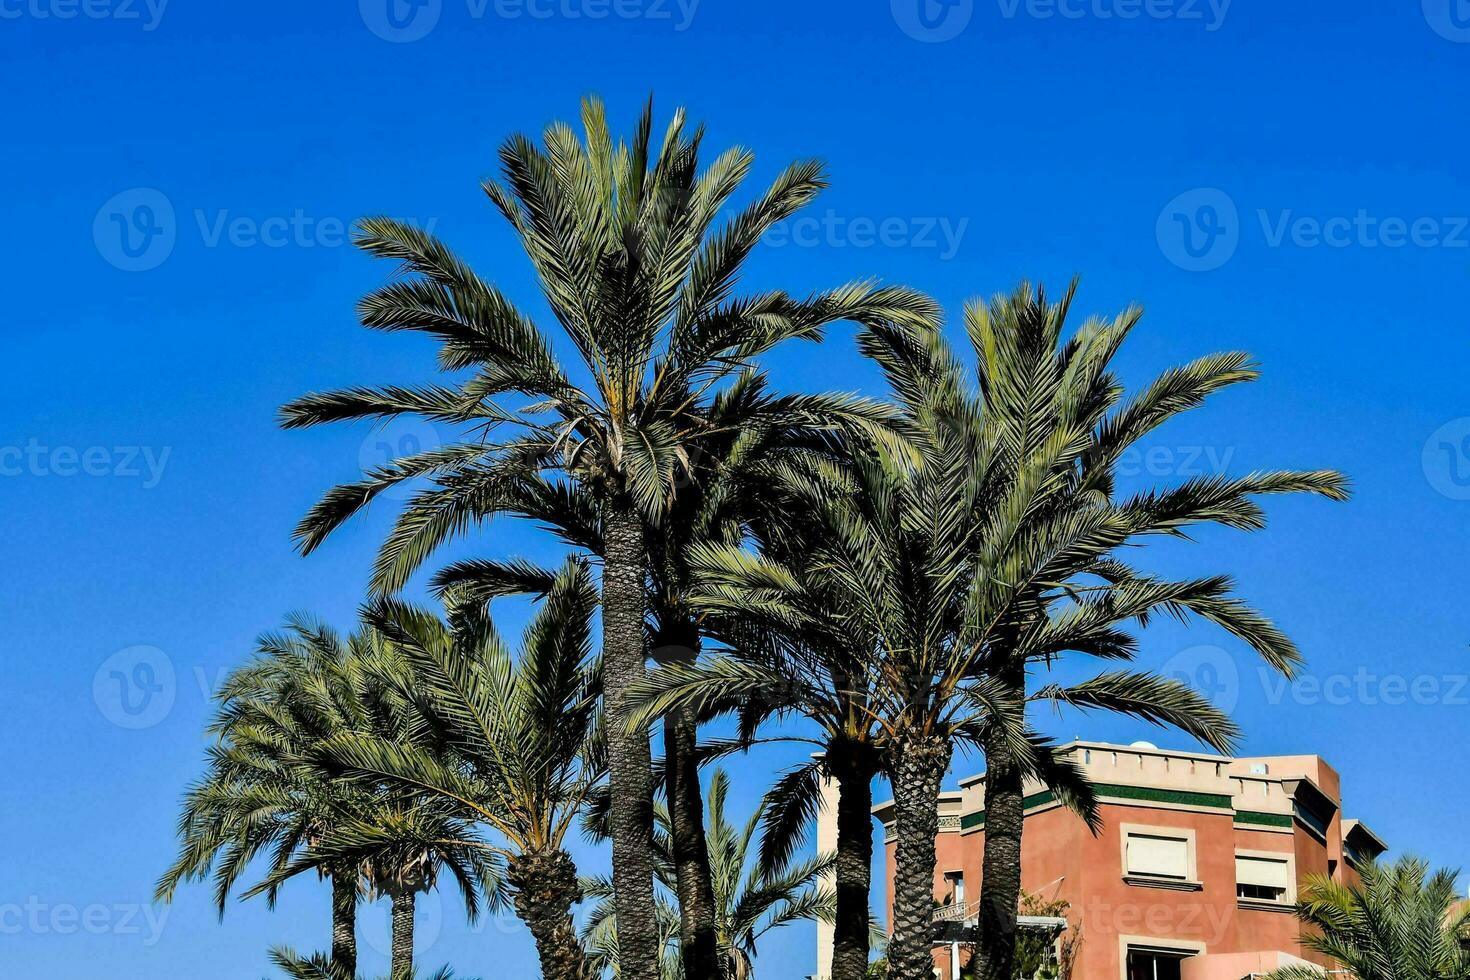 palm trees in the street in front of a building photo